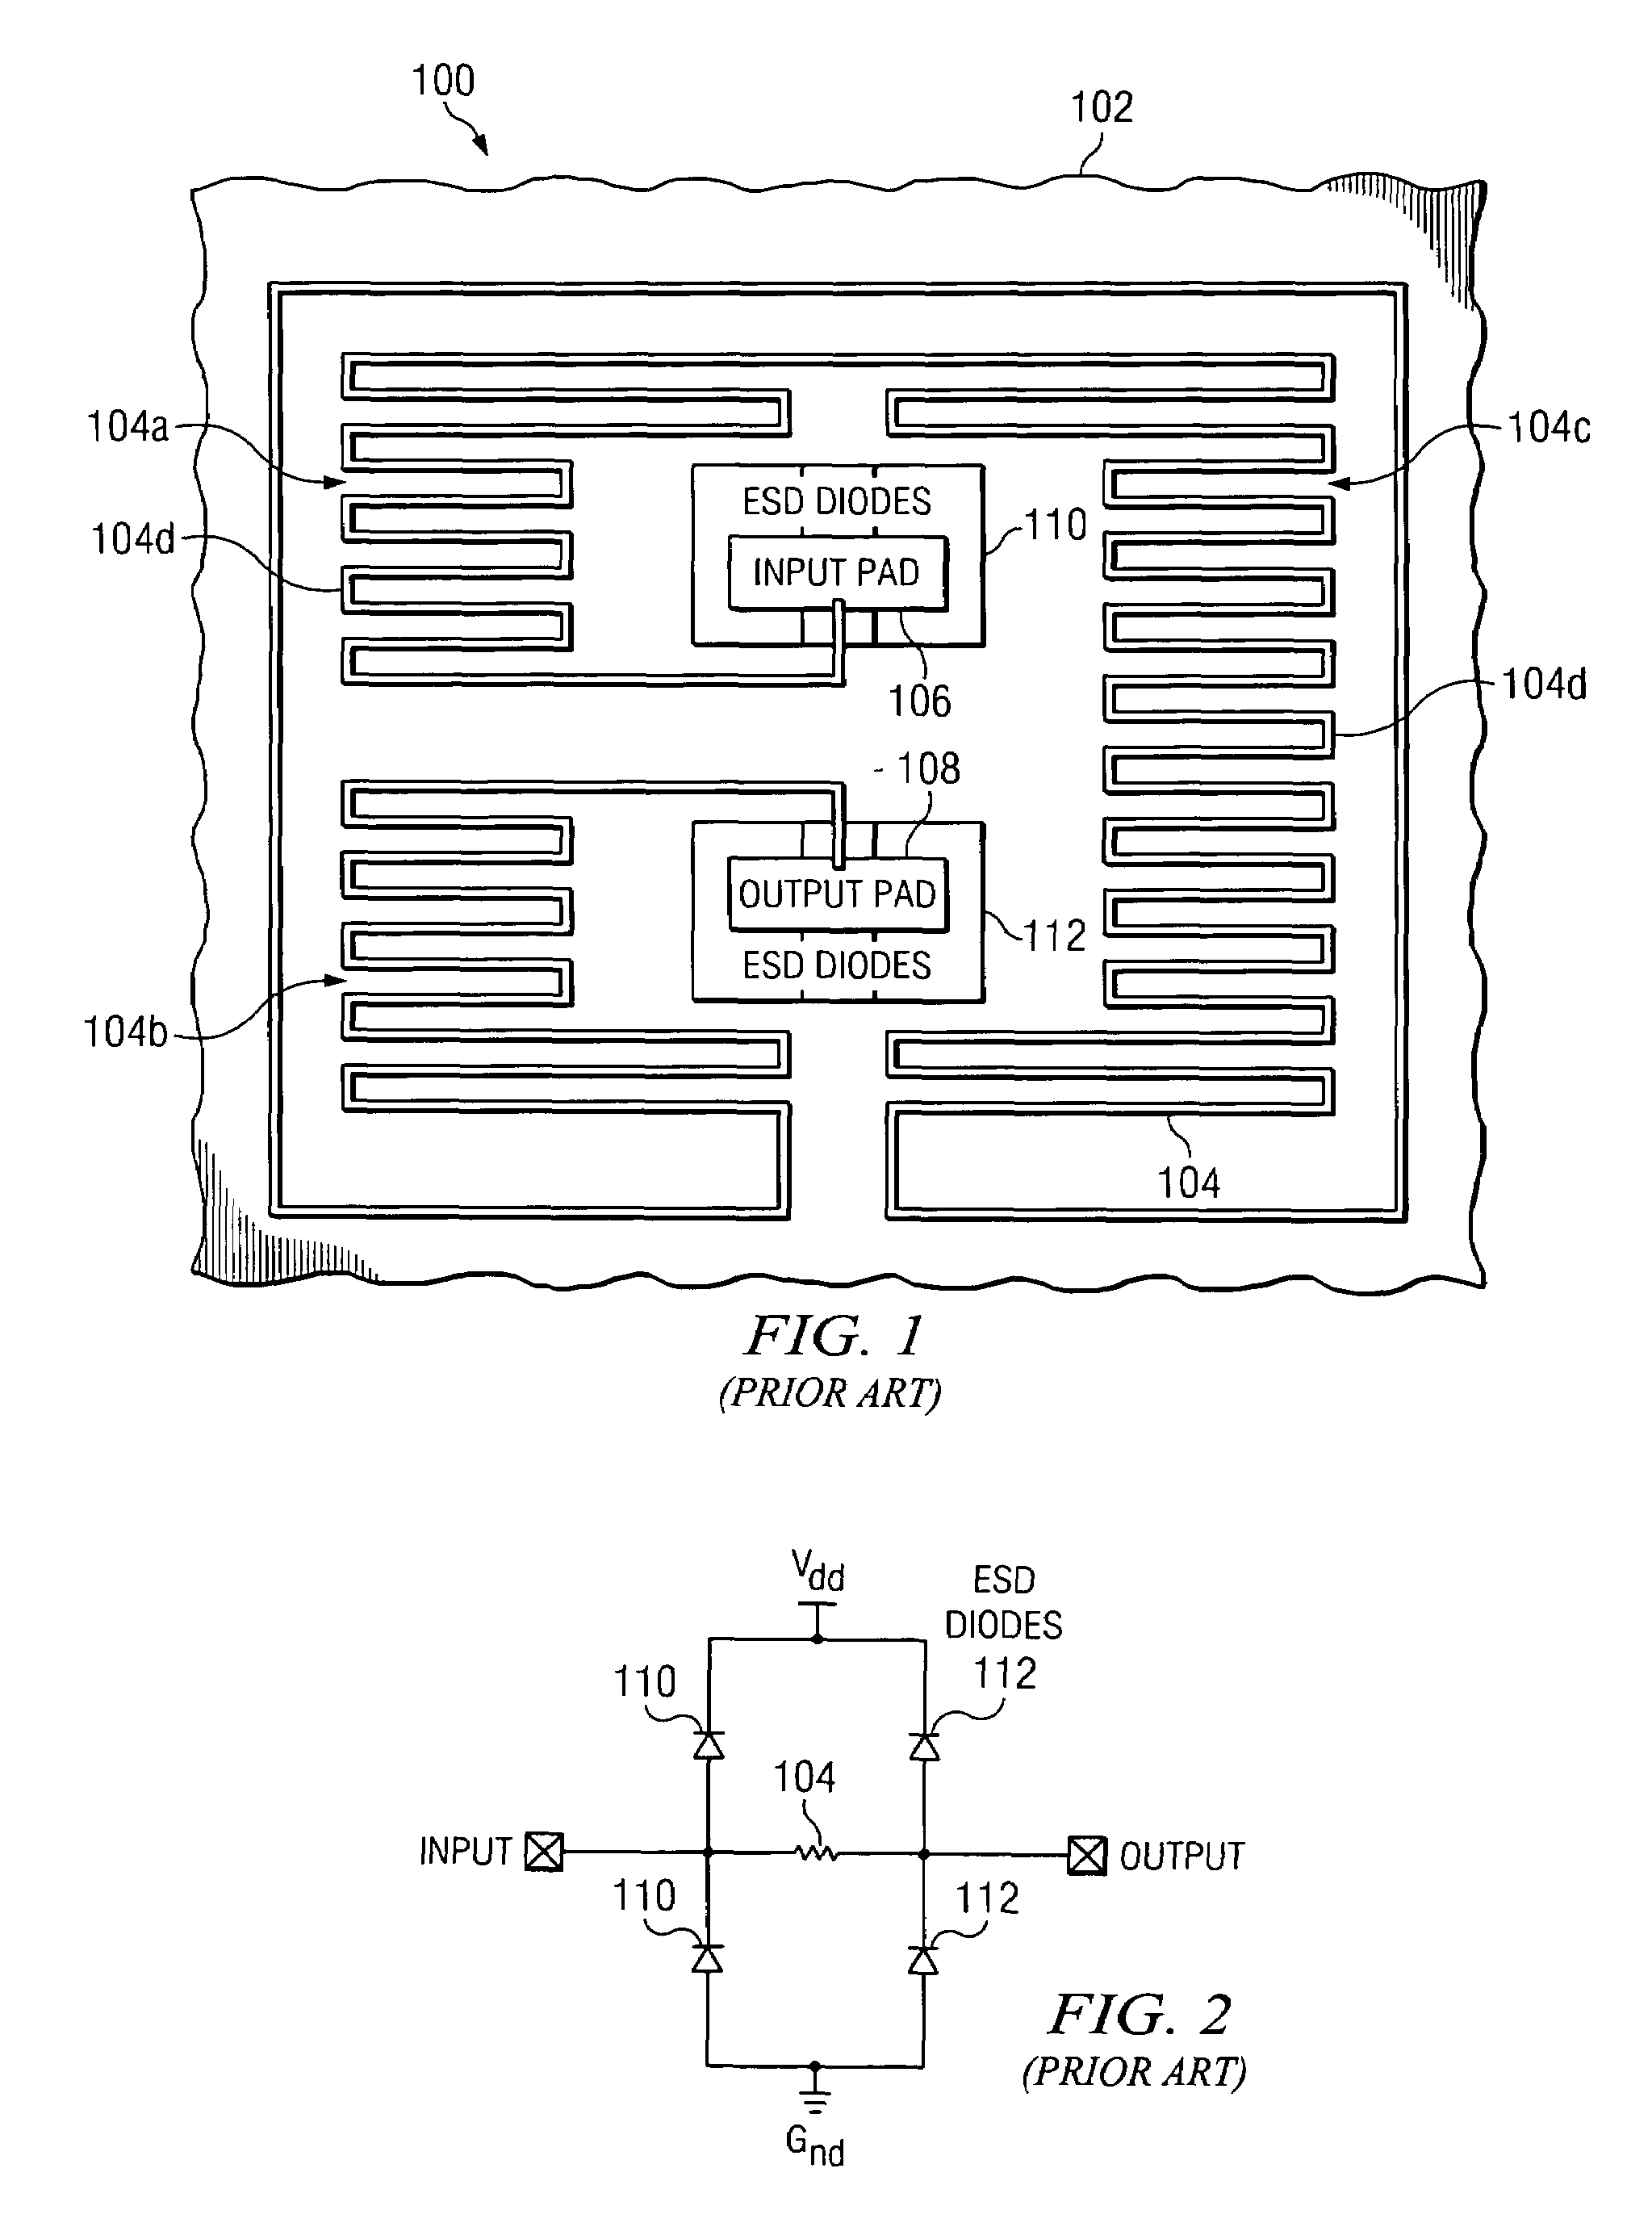 Multi-layered thermal sensor for integrated circuits and other layered structures